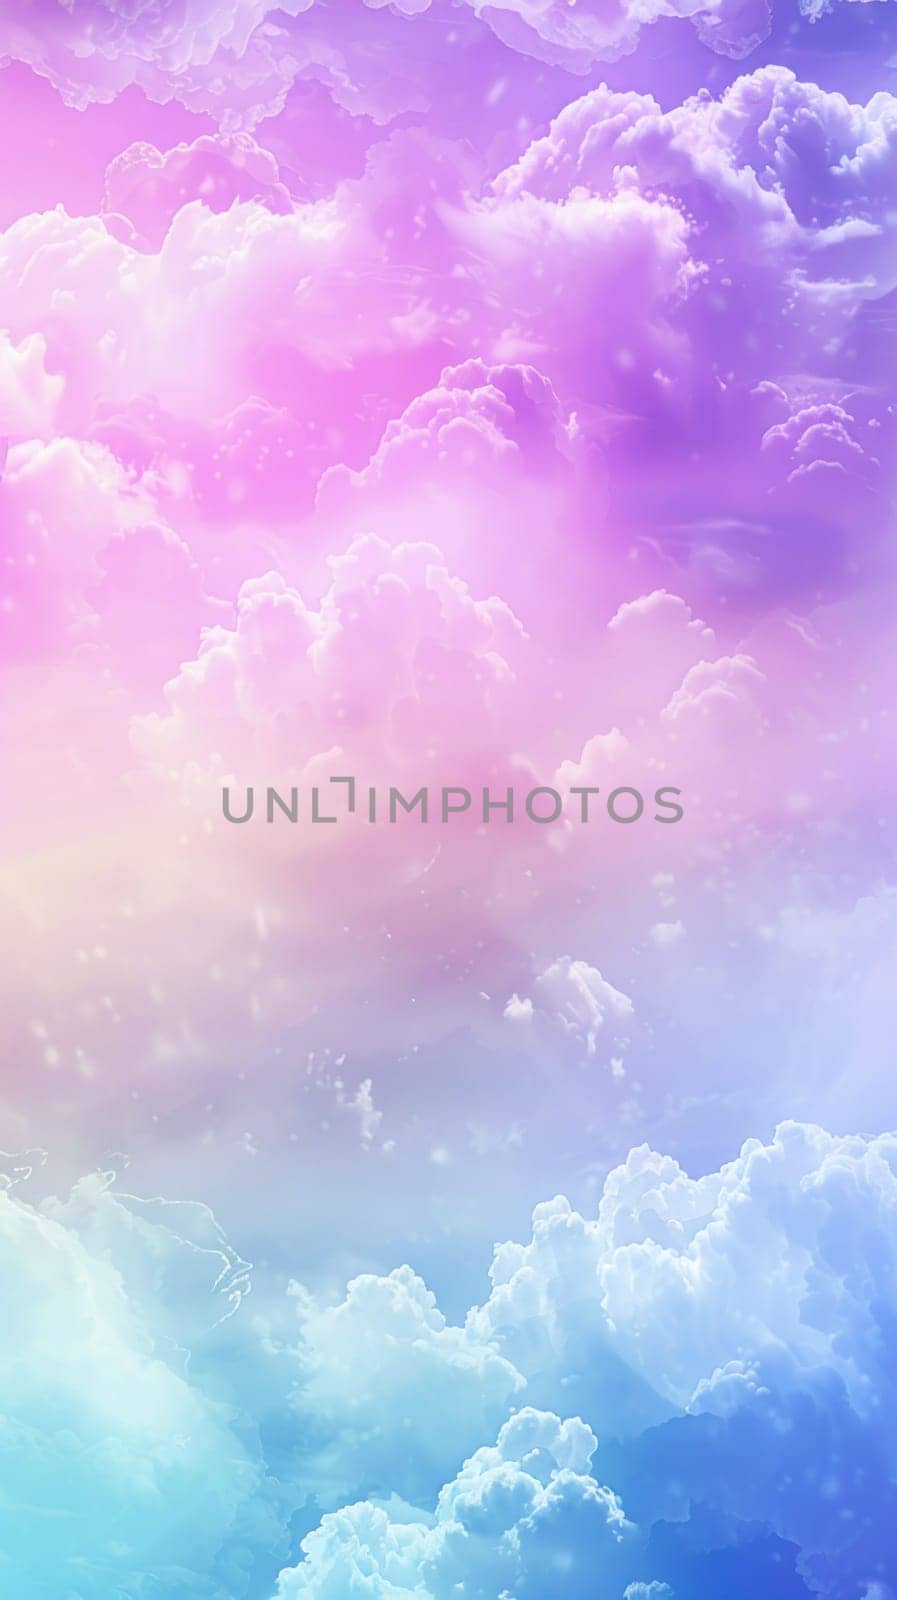 A colorful sky with clouds of different colors. The sky is filled with a rainbow of colors, creating a vibrant and cheerful atmosphere. The clouds are scattered throughout the sky, with some larger